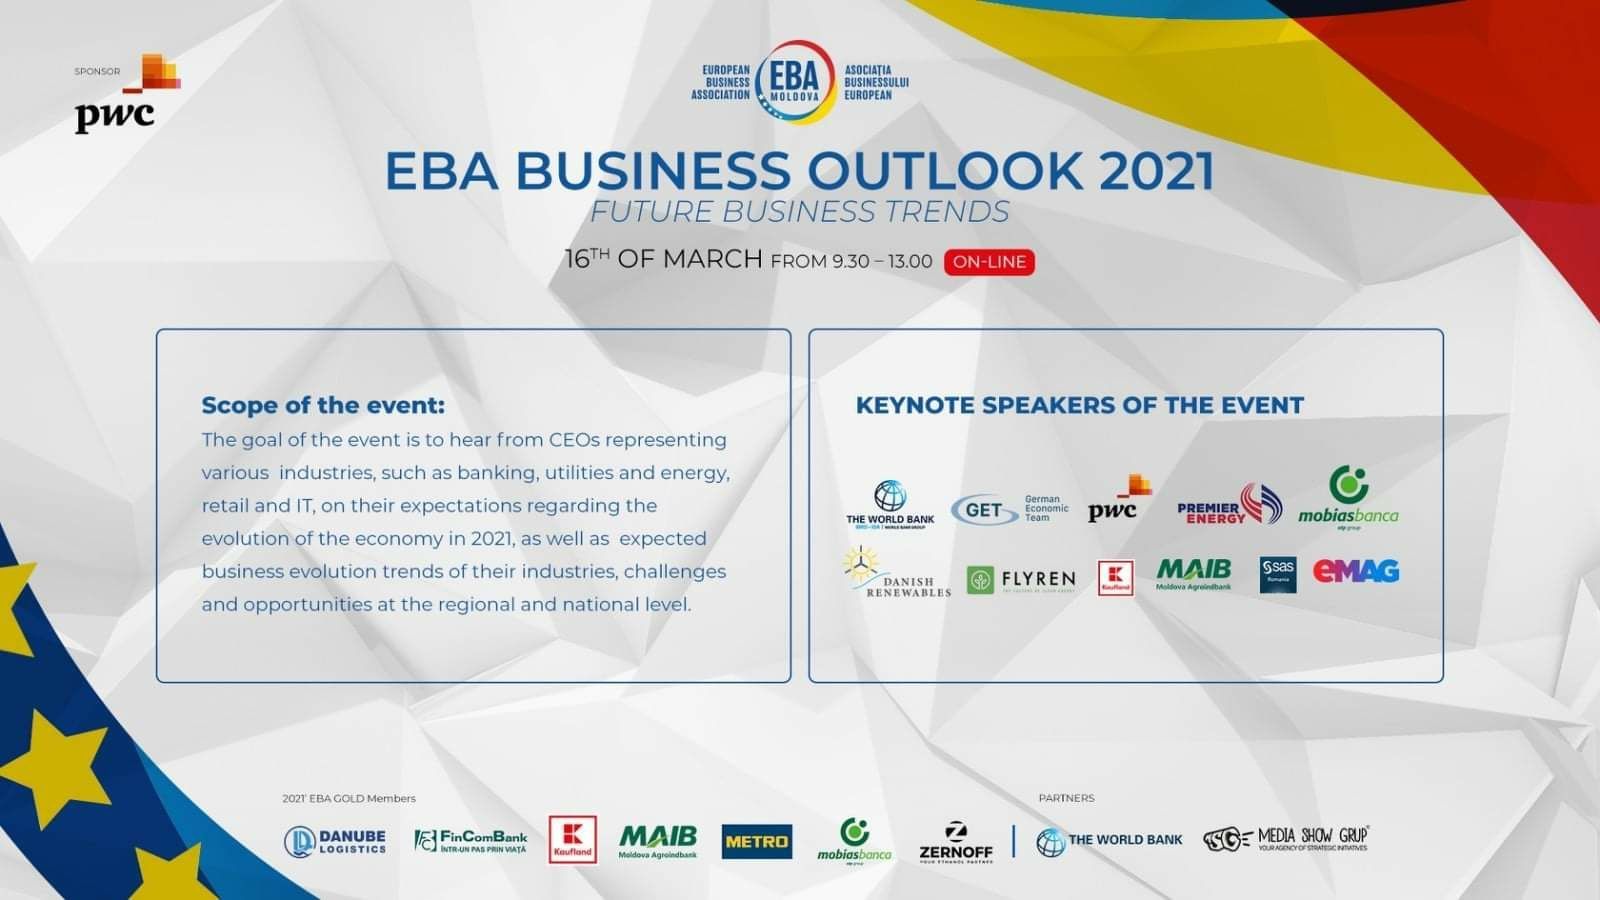 Welcome to EBA BUSINESS OUTLOOK 2021